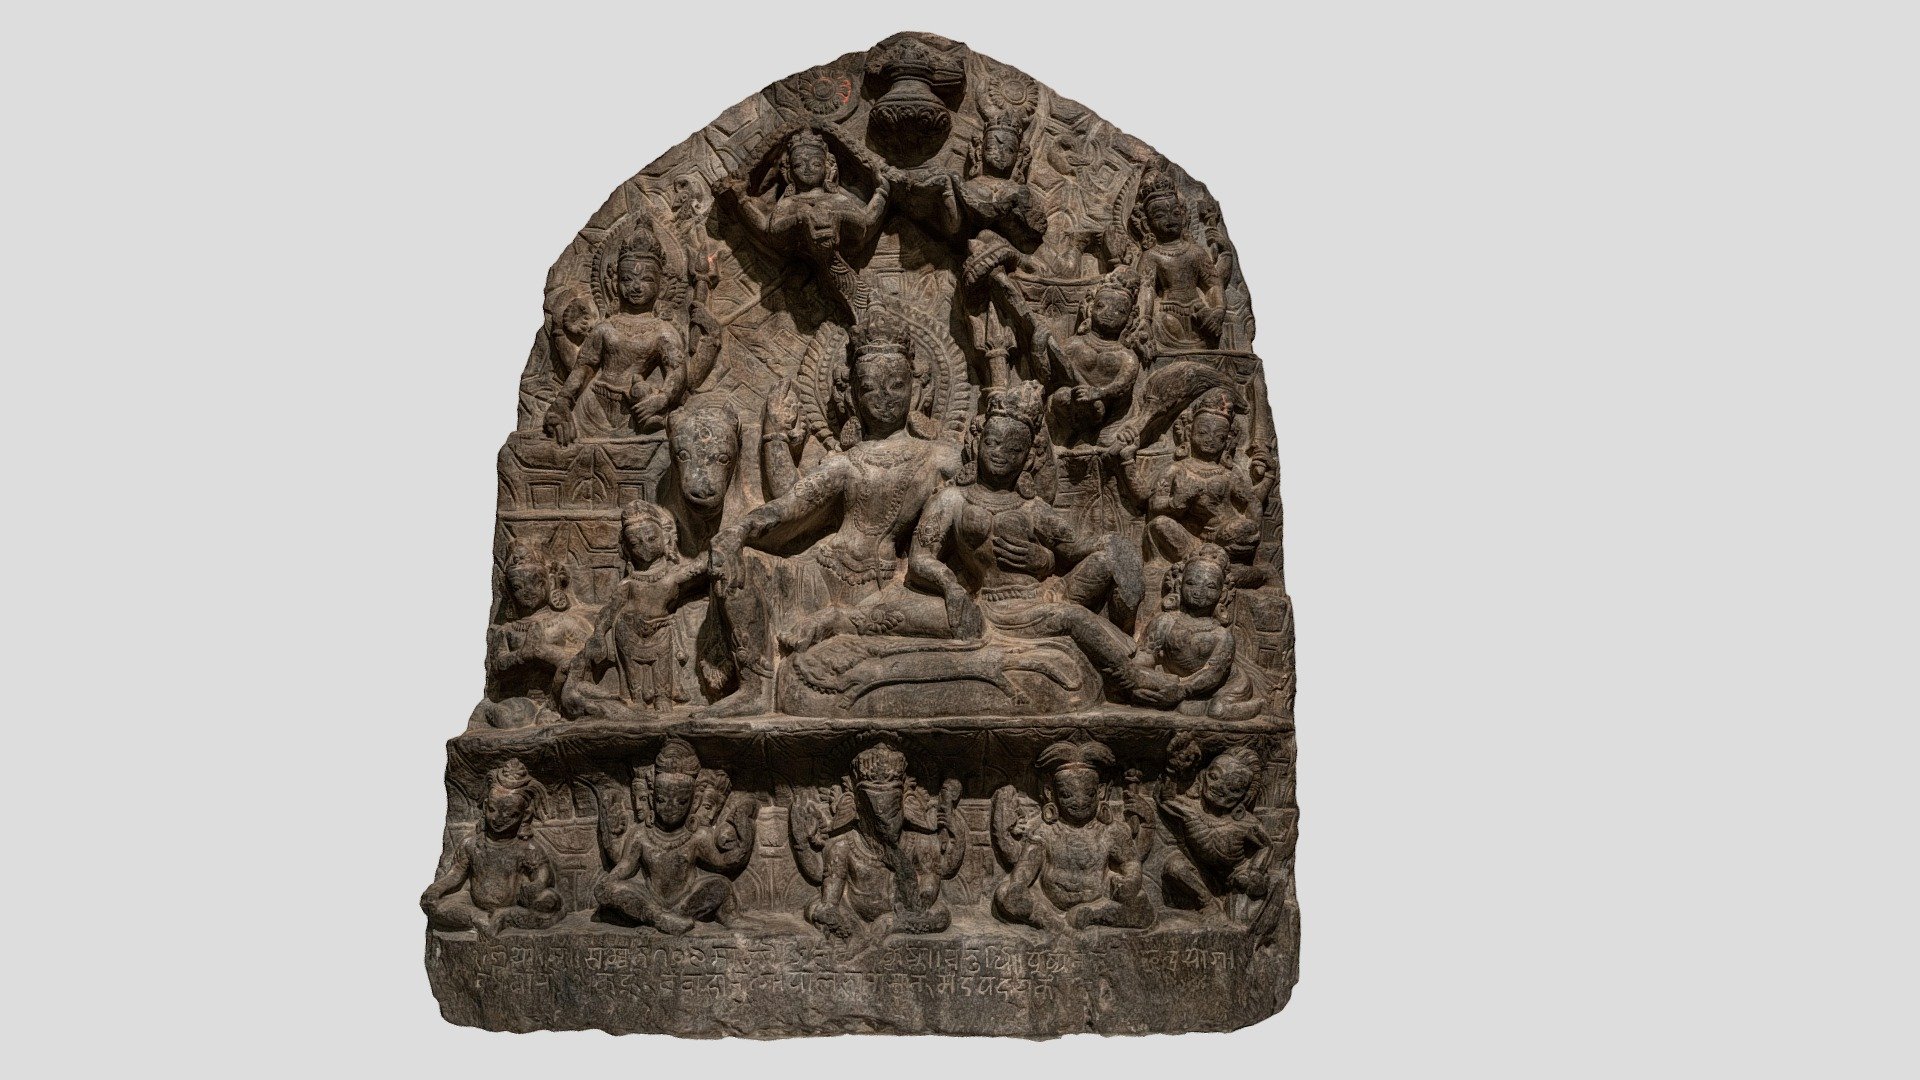 This relief likely hanged from a small resthouse in the Himalayas in the 16th century. Objects like this were believed to bring good fortune, and the favor of the pantheon of Hindu gods. 

You can see a pretty rich mythological narrative here, and it is important to remember, devotees of Hinduism in this region believe that Shiva, Parvati, and their entourage live on top of Mount Kailash. Mount Kailash is the source of legends, myths, and odd speculation.  From a public policy fordidding alpinists to climb the cone-shaped mountain, to claims by &ldquo;ancient astronaut theorists